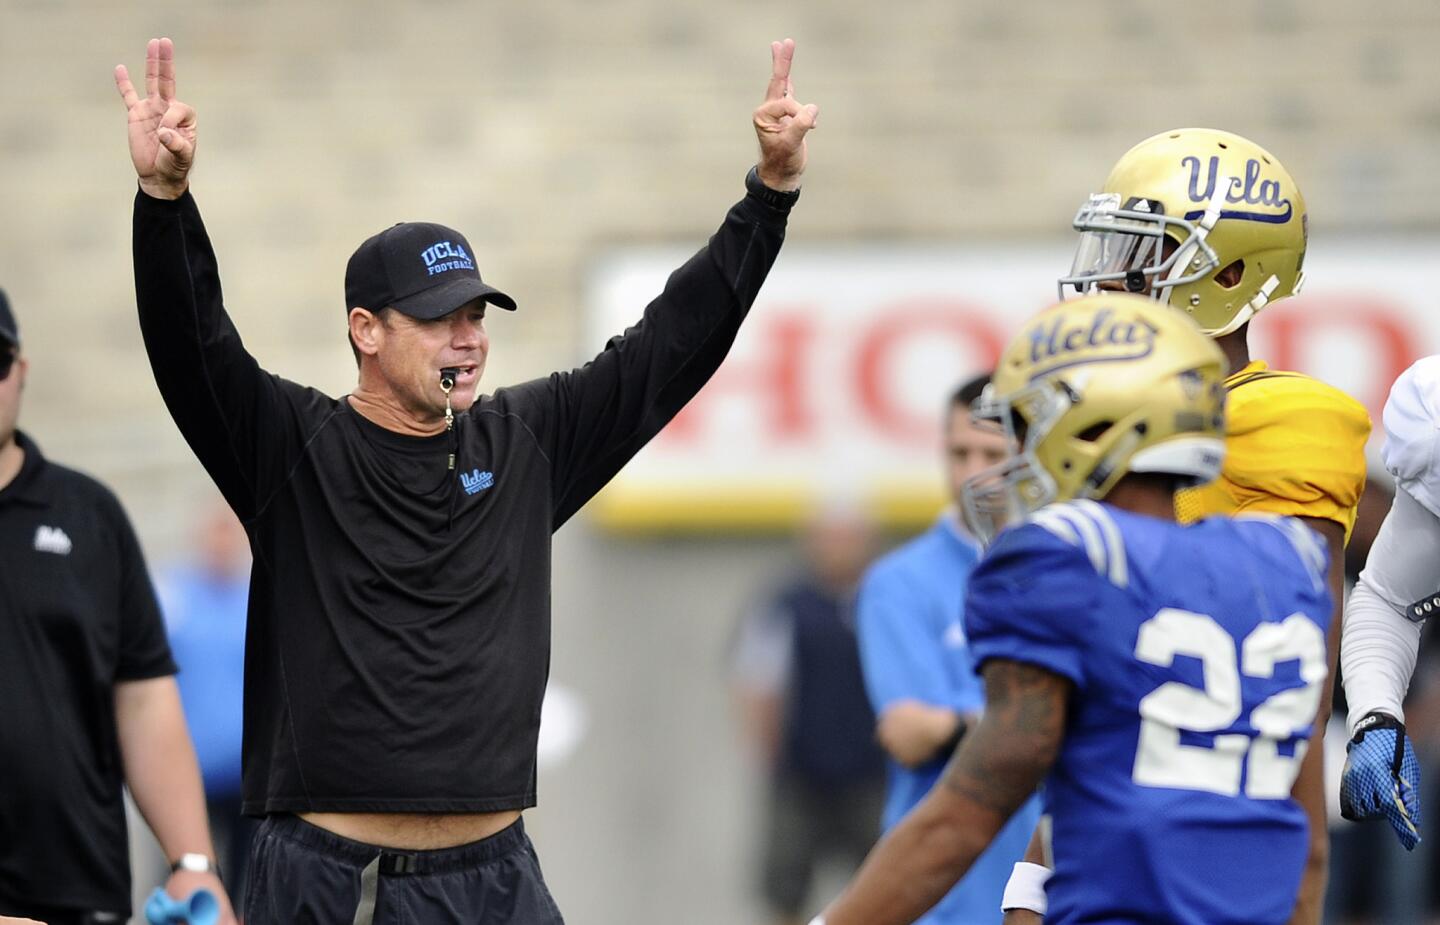 UCLA head coach Jim Mora calls a play during the spring football game at the Rose Bowl on Saturday.